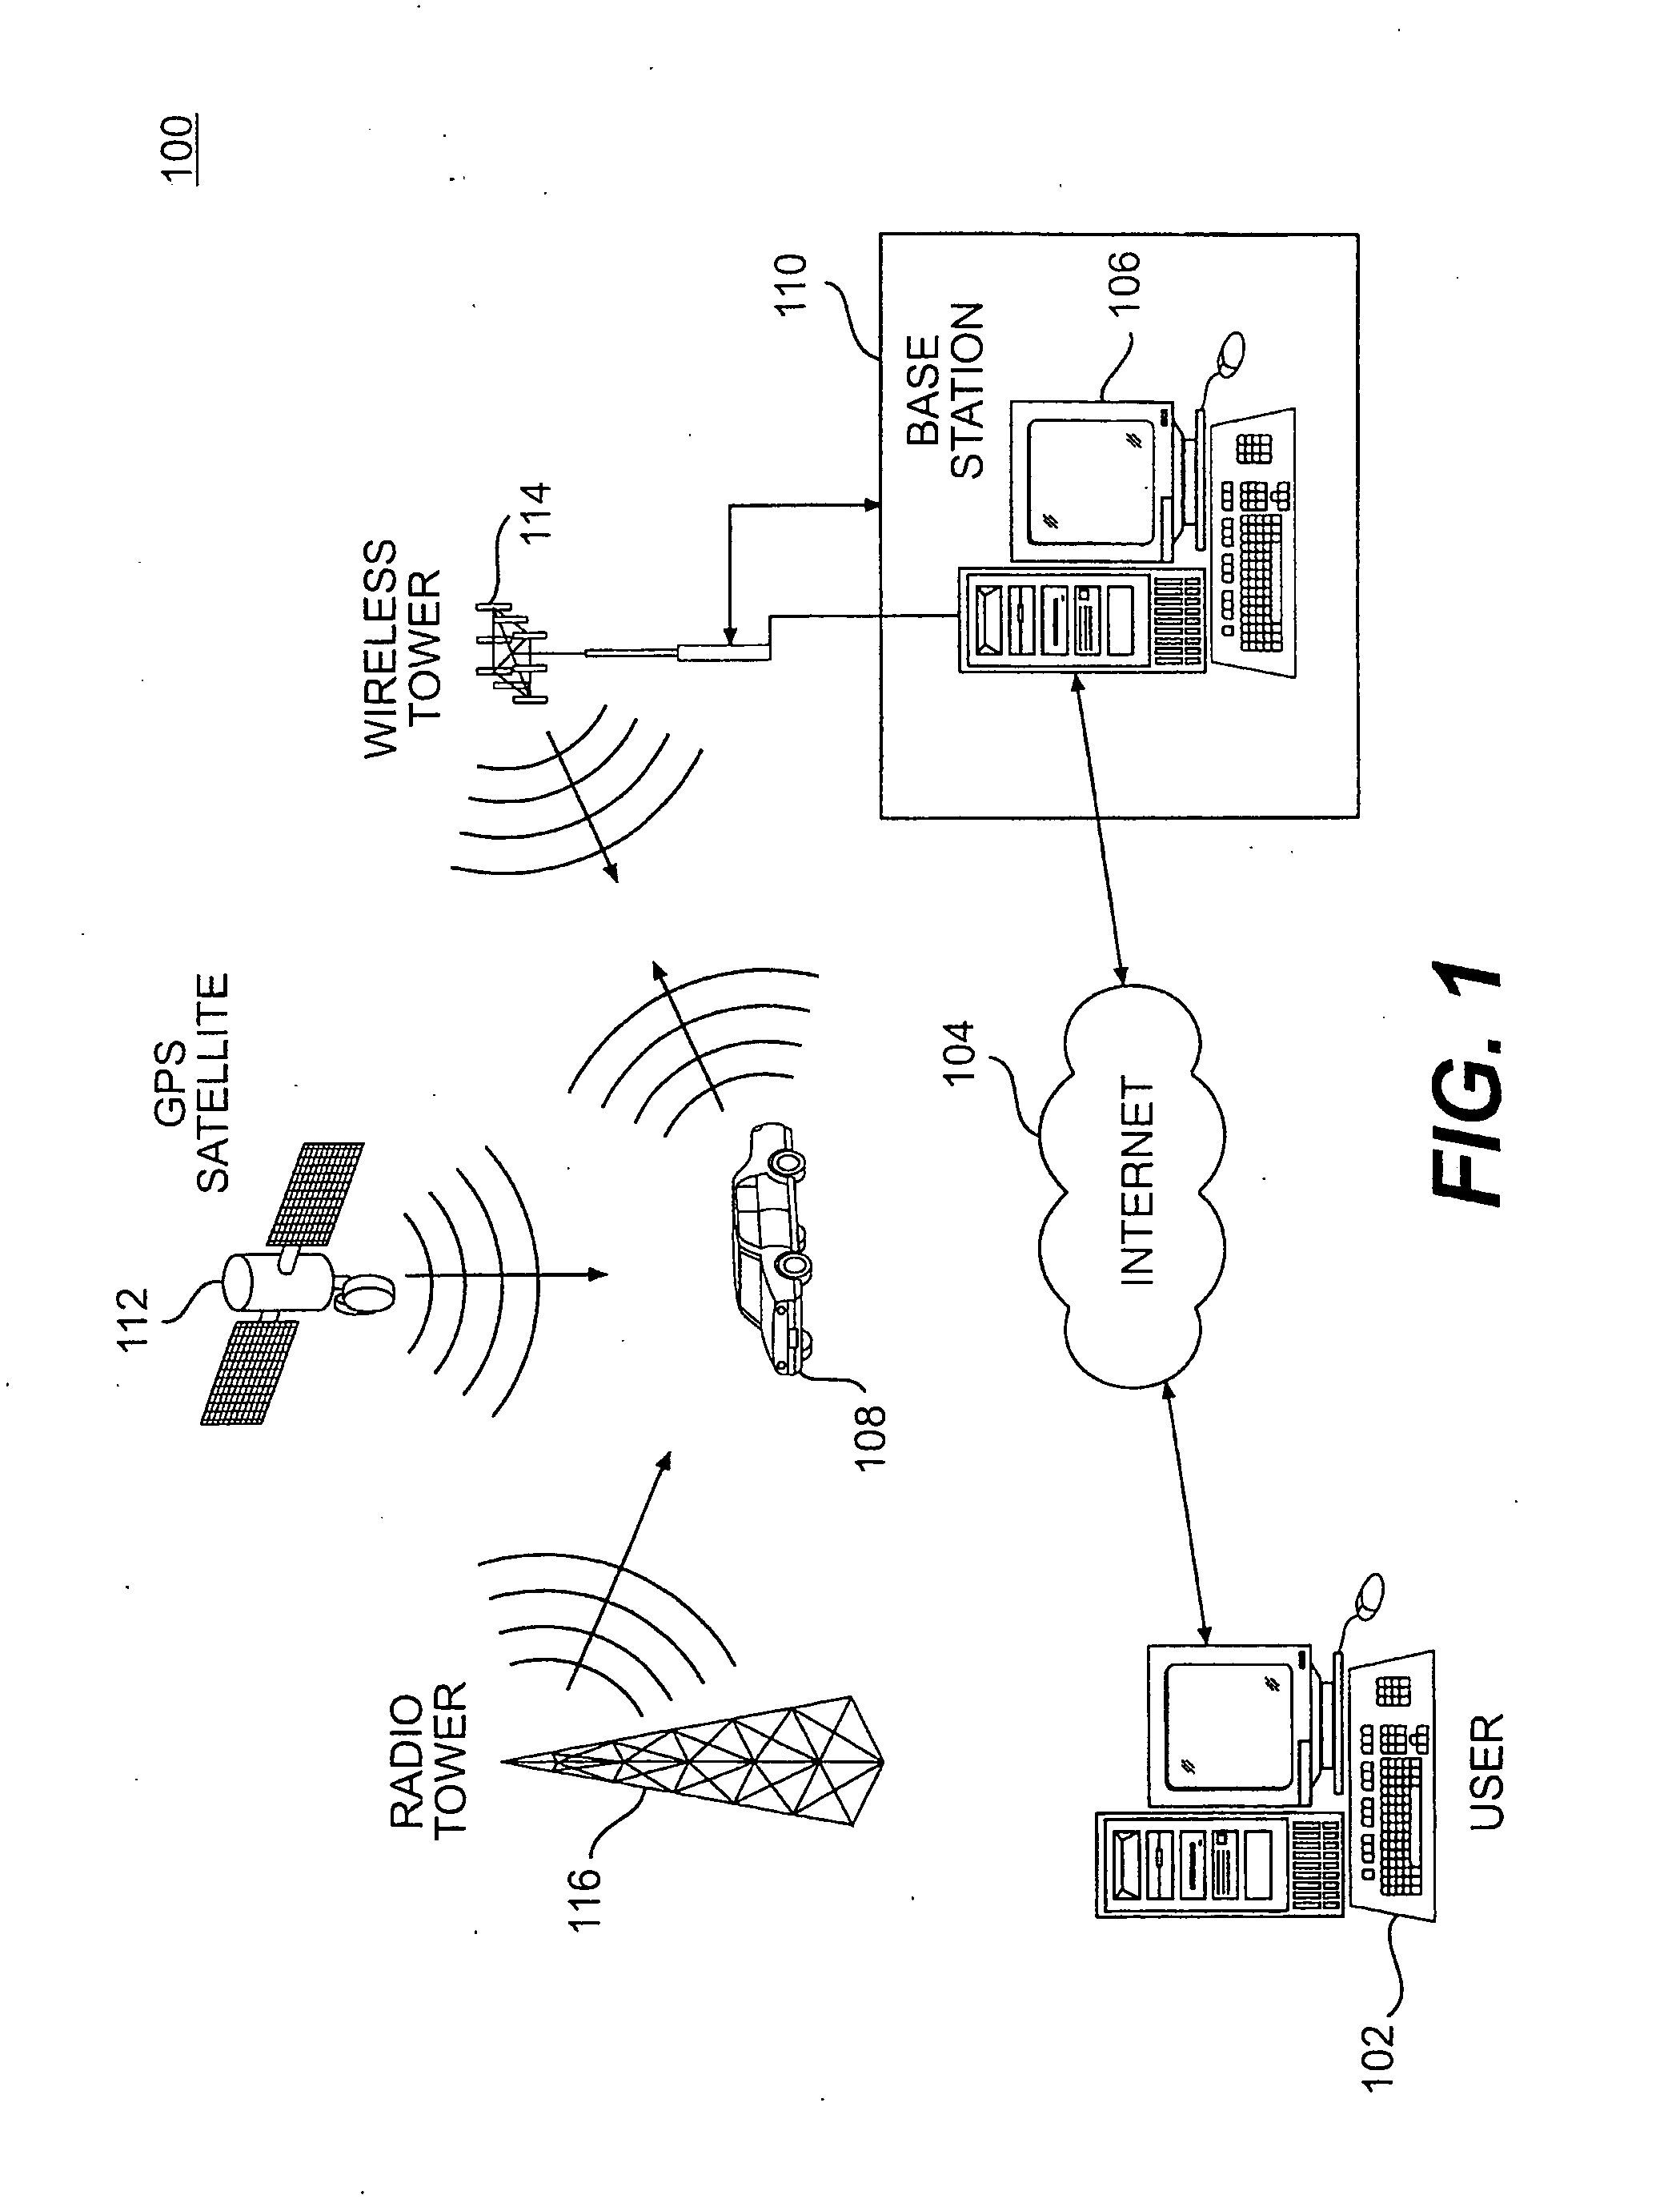 System and Method for Obtaining Consumer Related Statistics